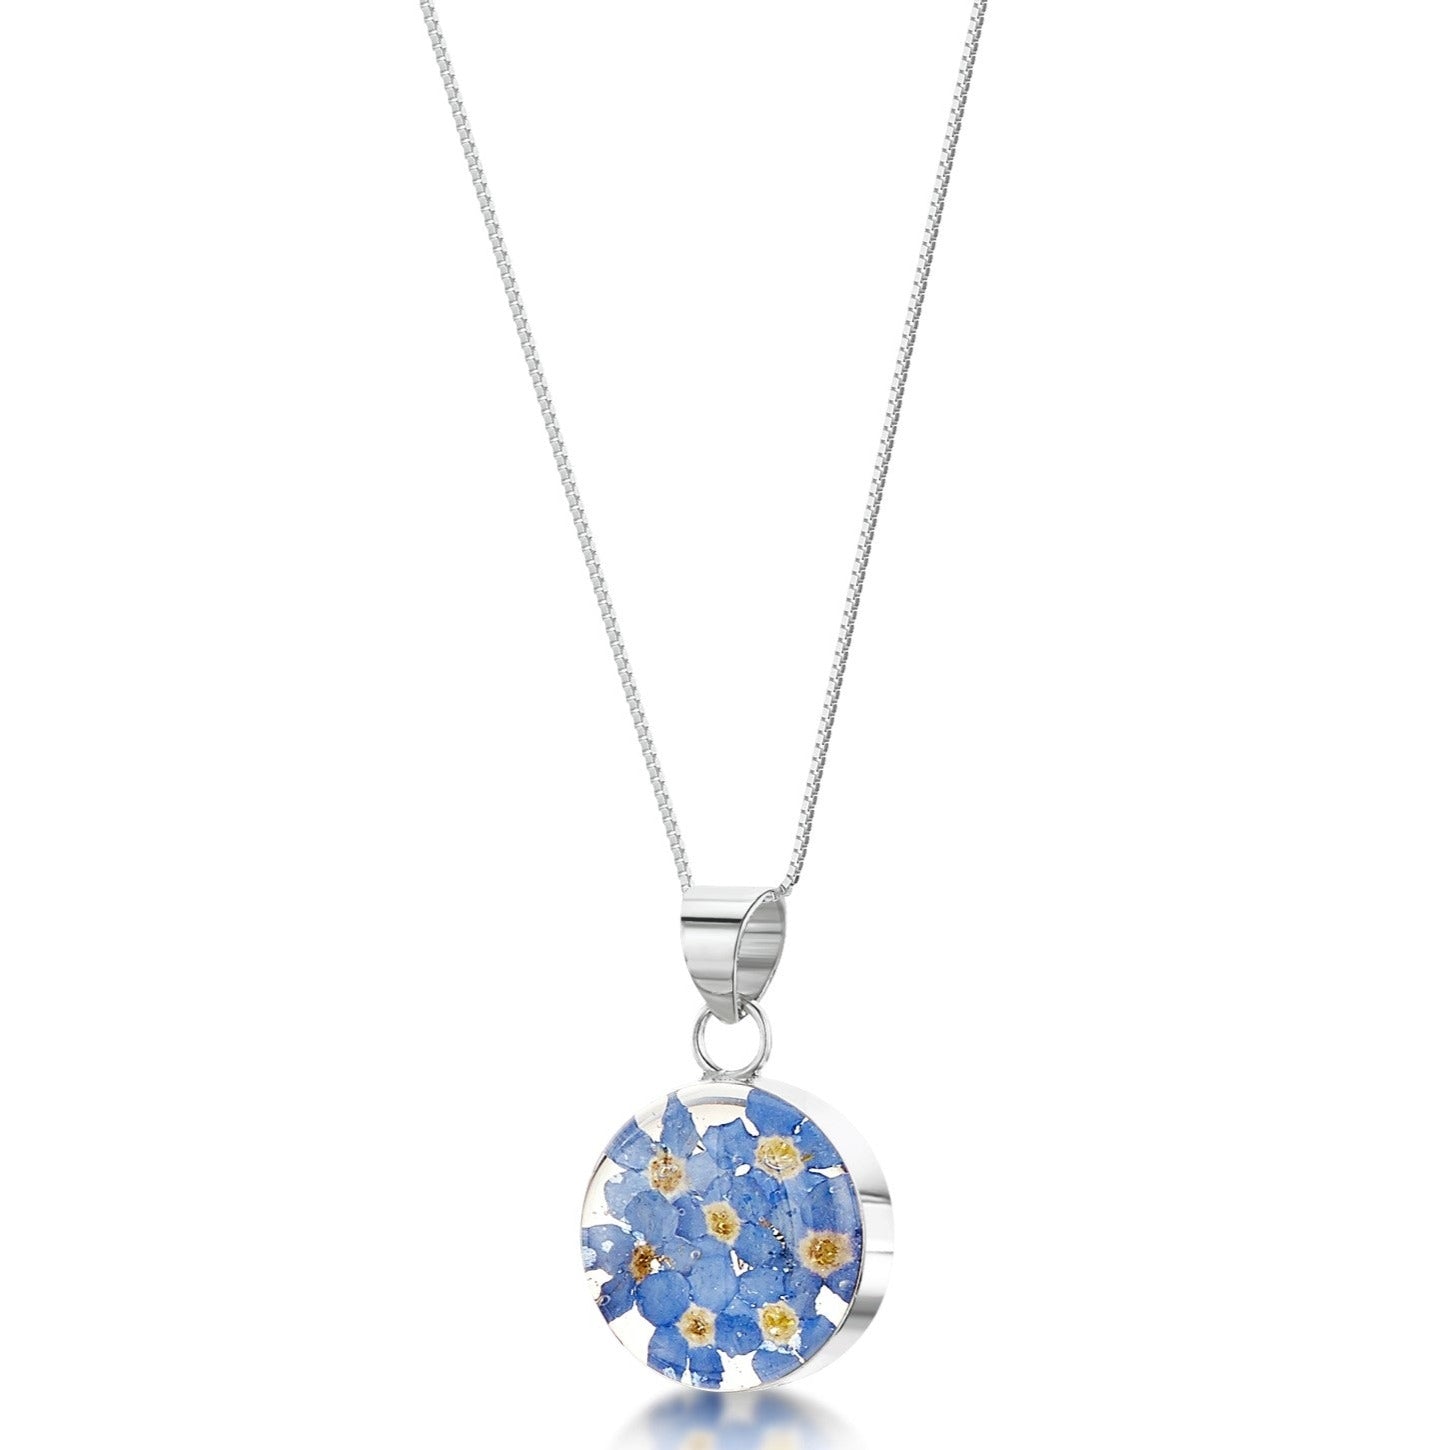 Forget-me-not silver round pendant